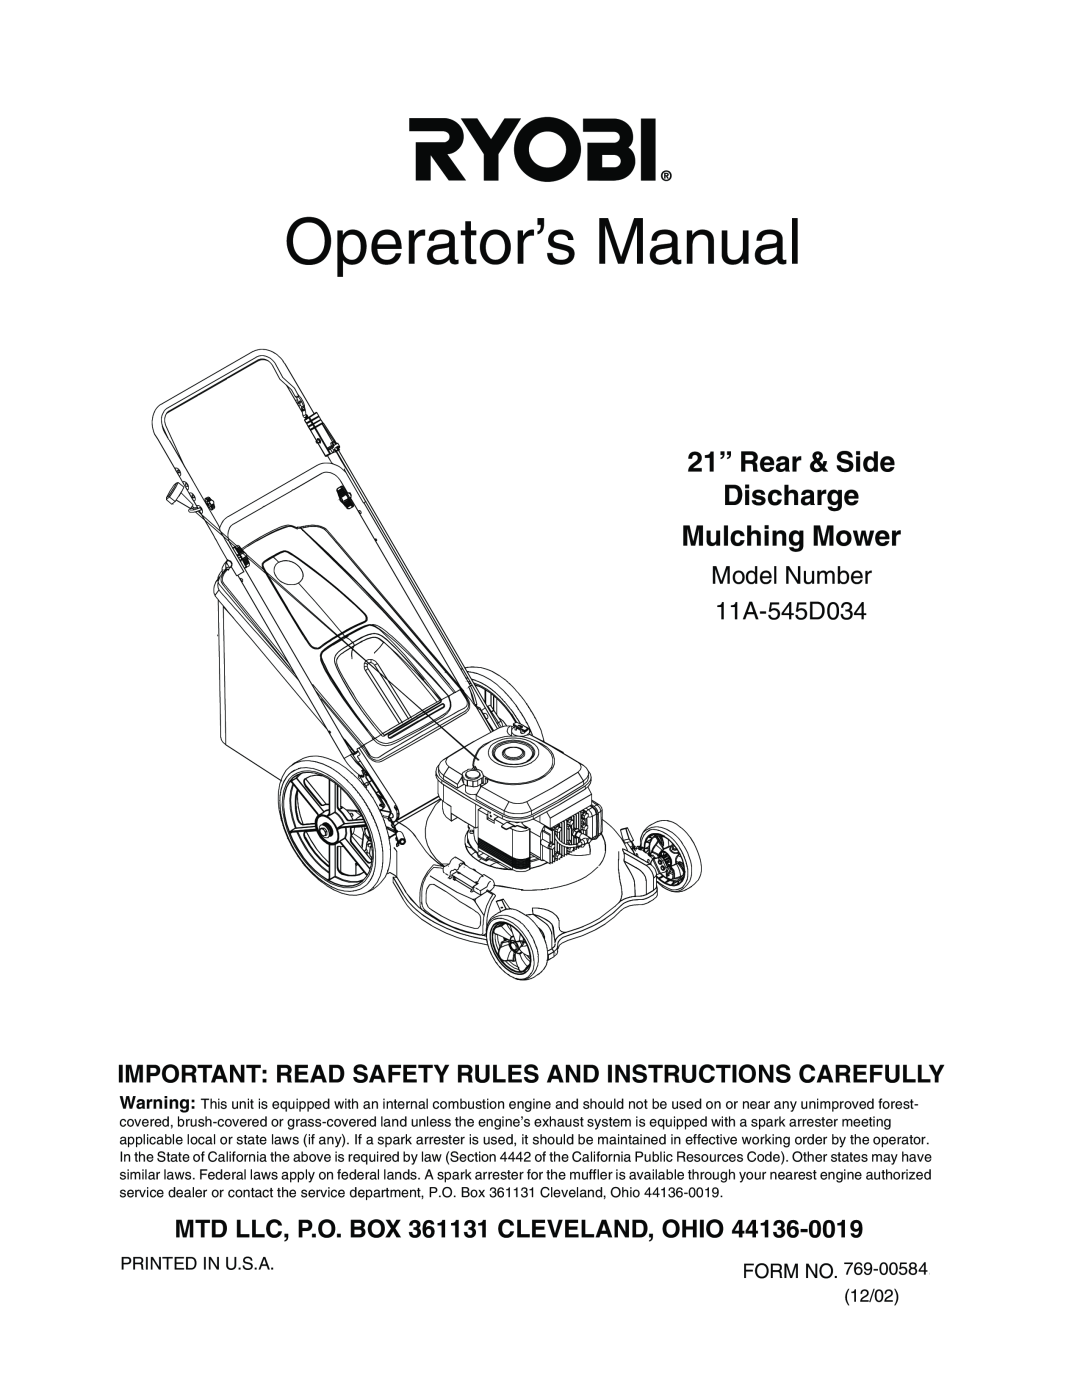 MTD manual Operator’s Manual, 21” Rear & Side Discharge Mulching Mower, Model Number 11A-545D034 